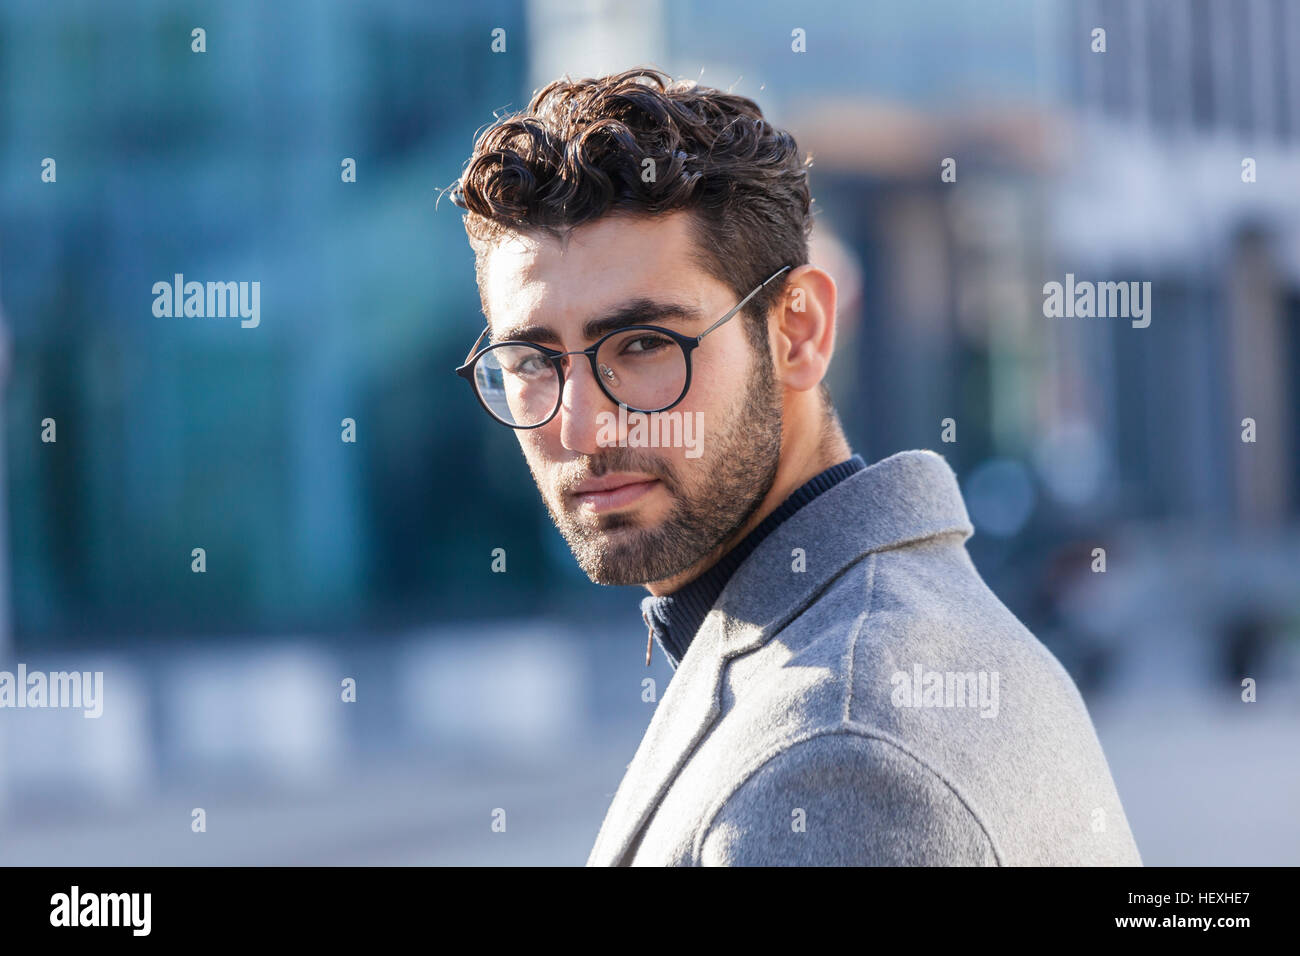 Portrait of young businessman with beard and spectacles Stock Photo